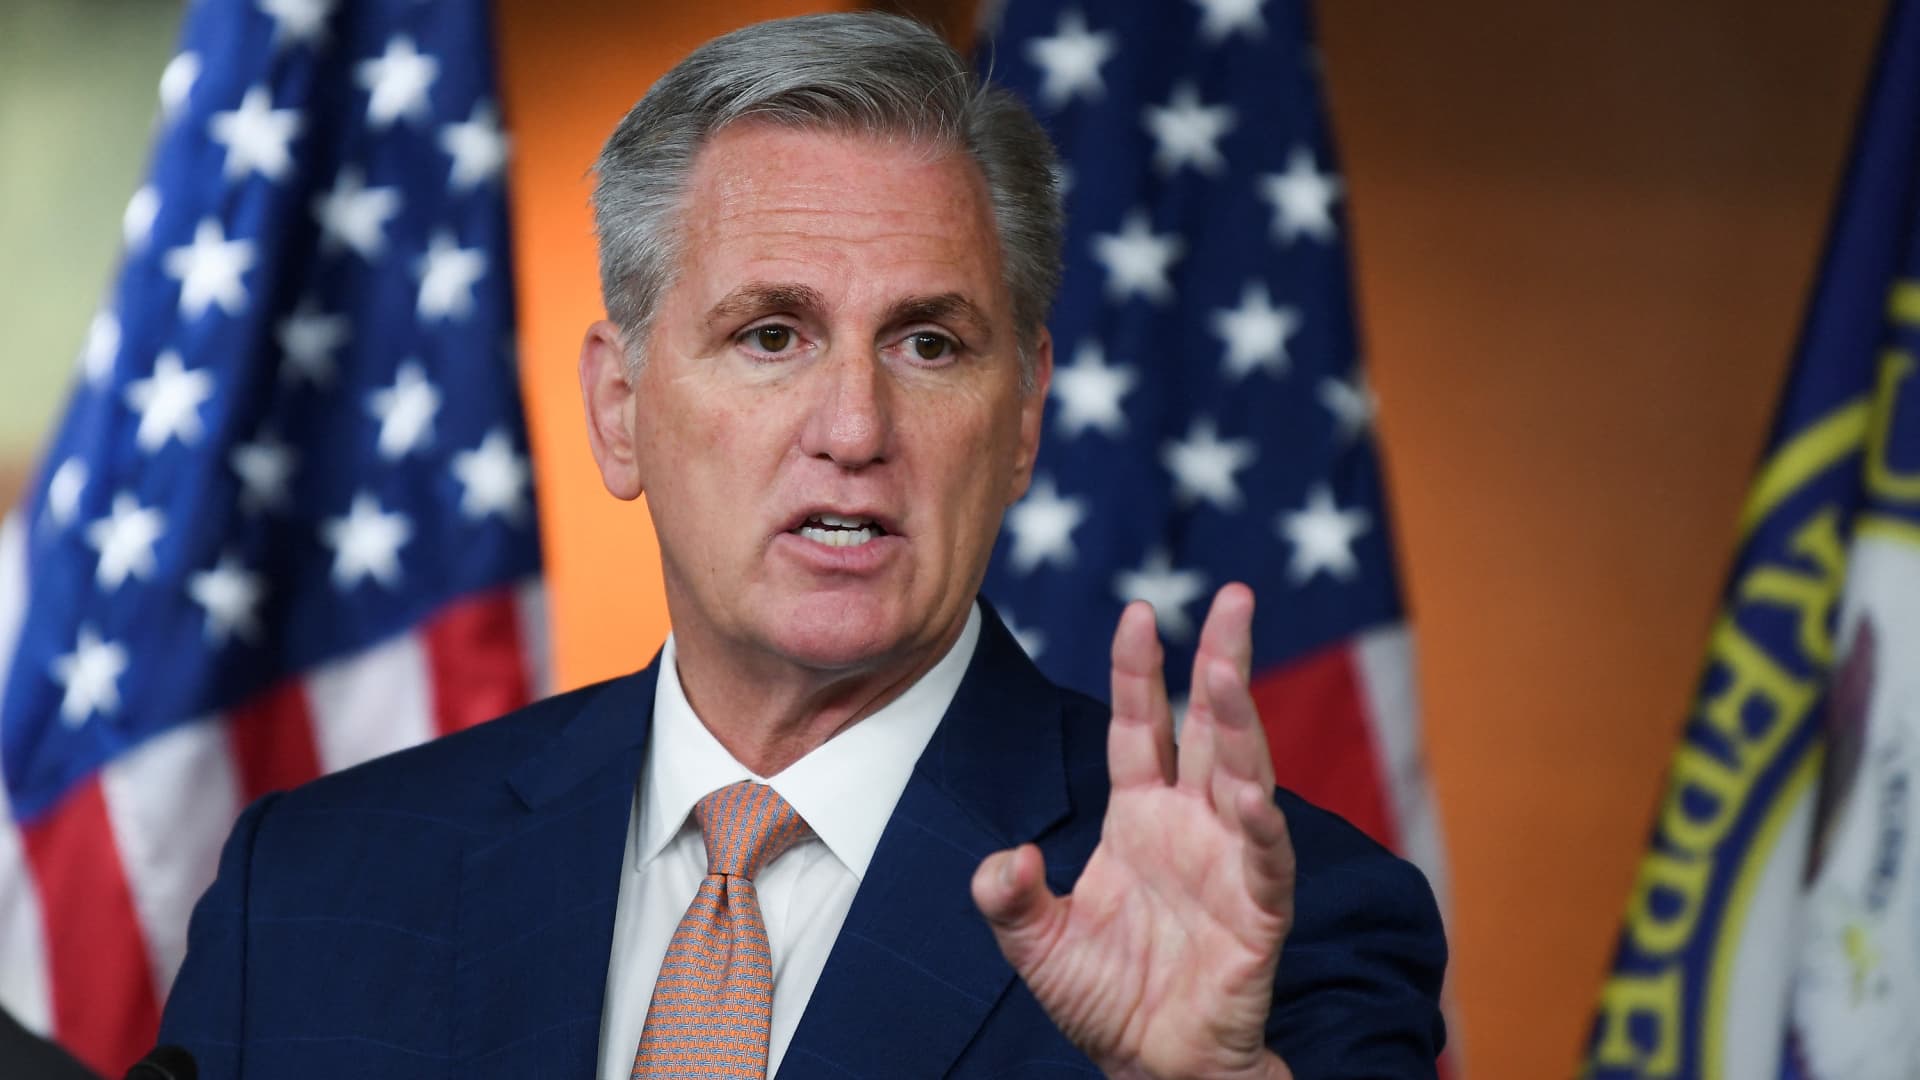 McCarthy’s struggle to lock down House Speaker roils GOP caucus, delays key committee assignments